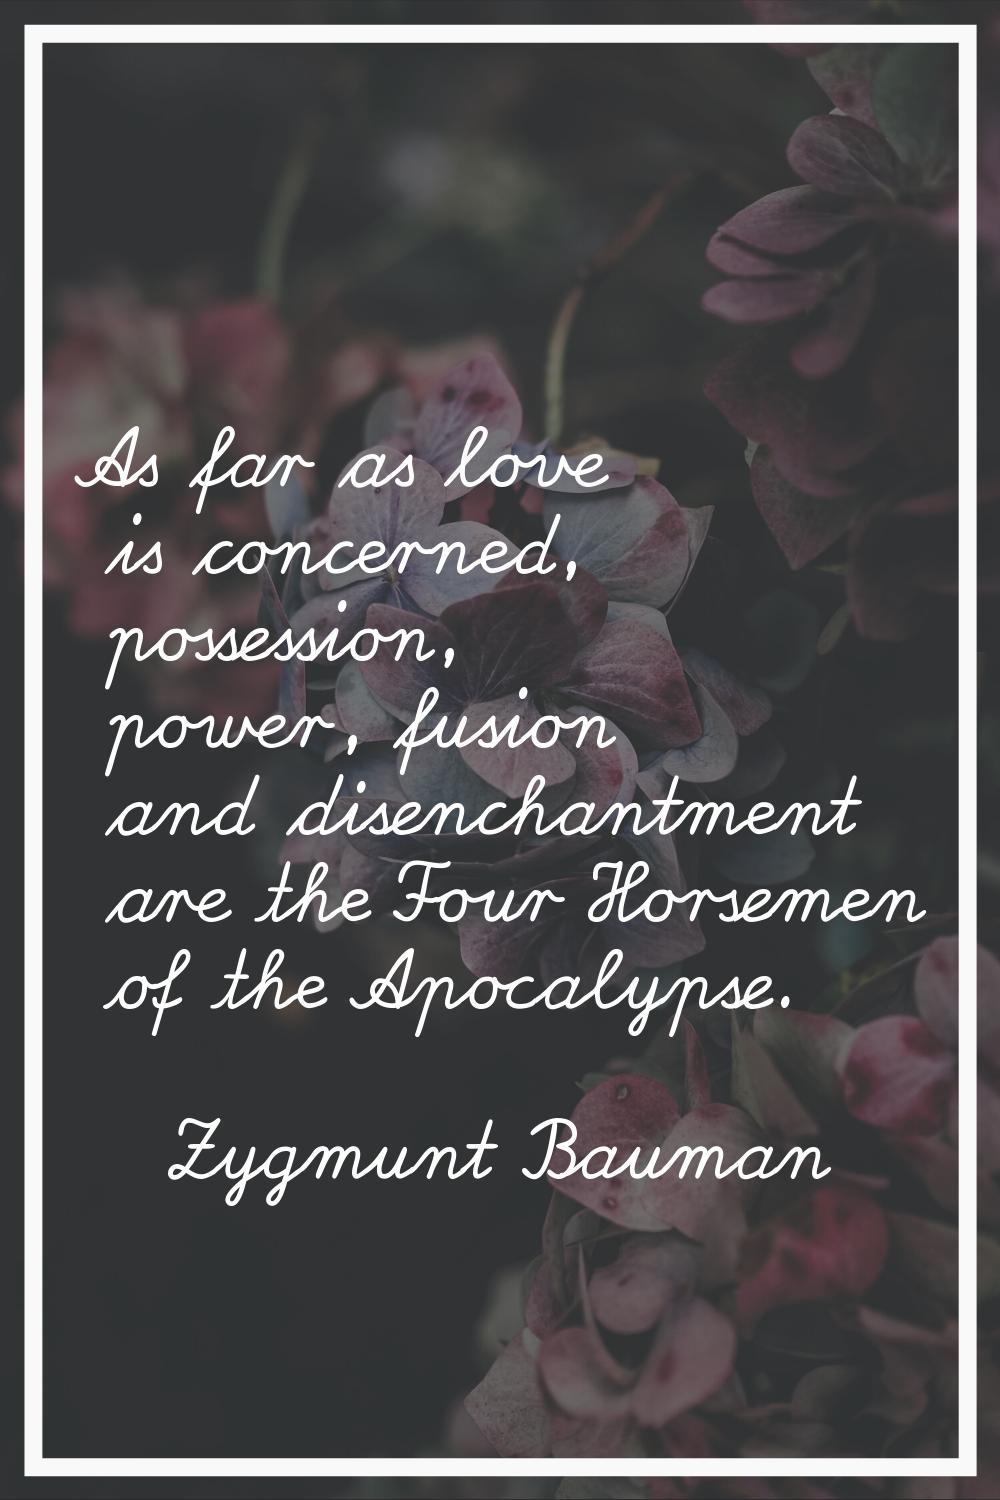 As far as love is concerned, possession, power, fusion and disenchantment are the Four Horsemen of 